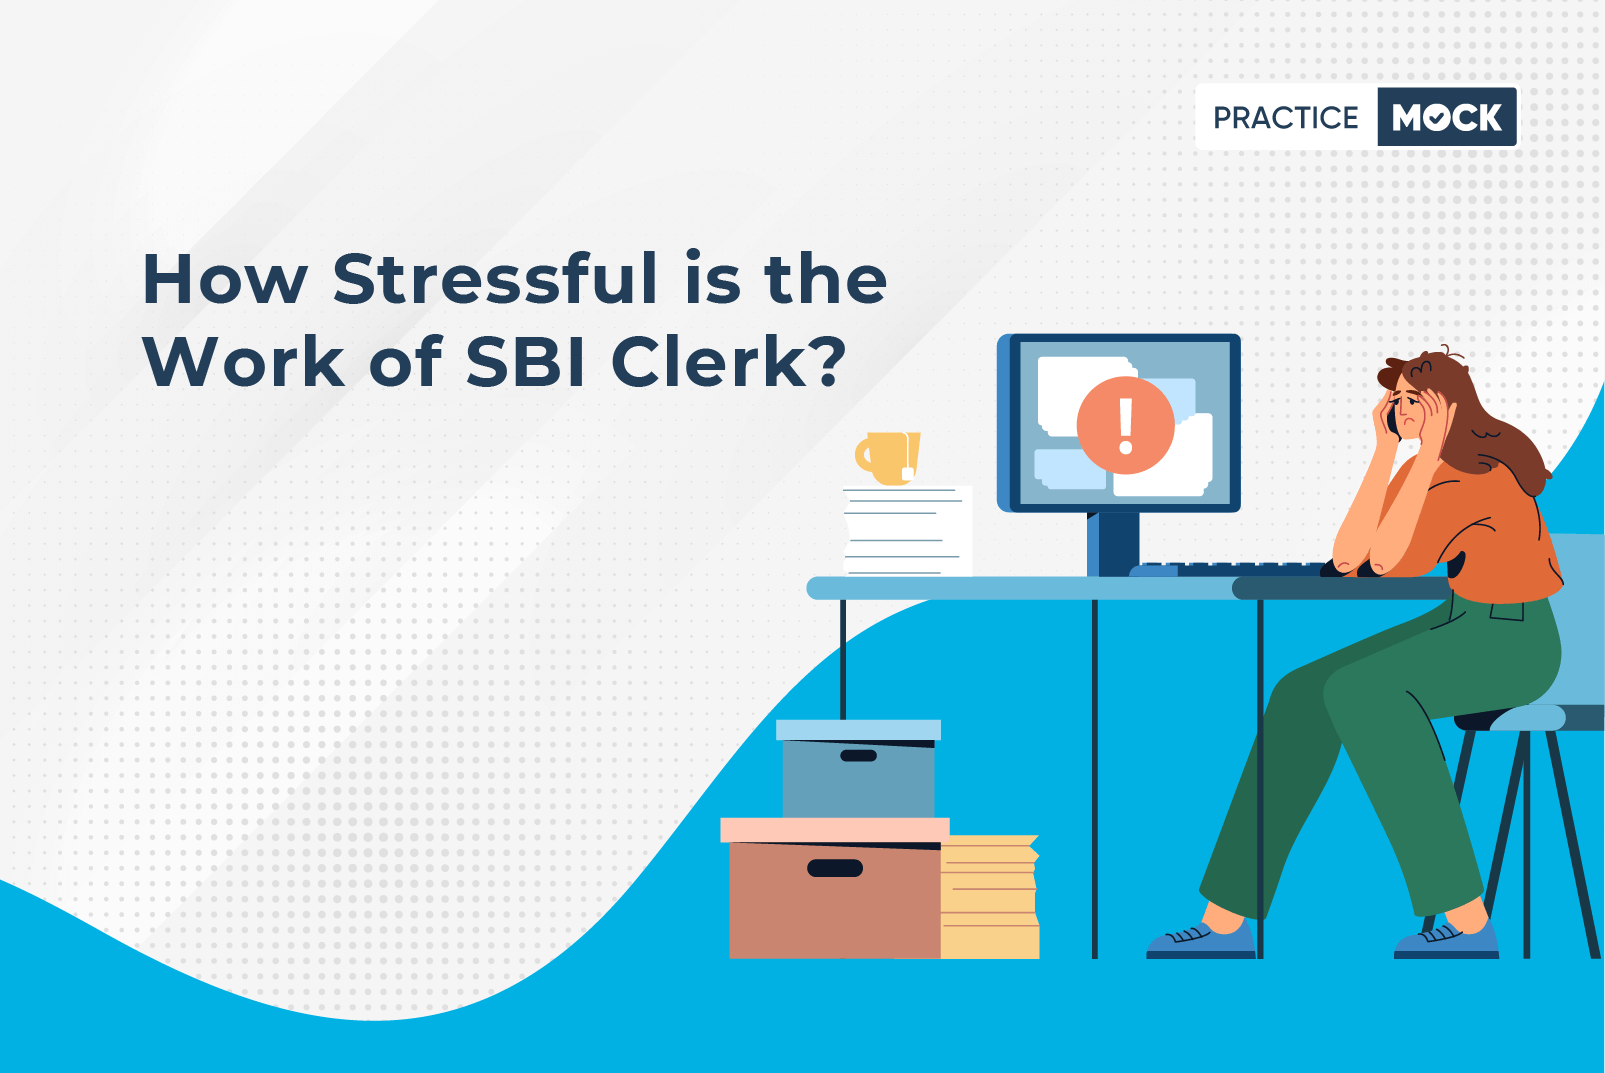 How Stressful is the Work of SBI Clerk?